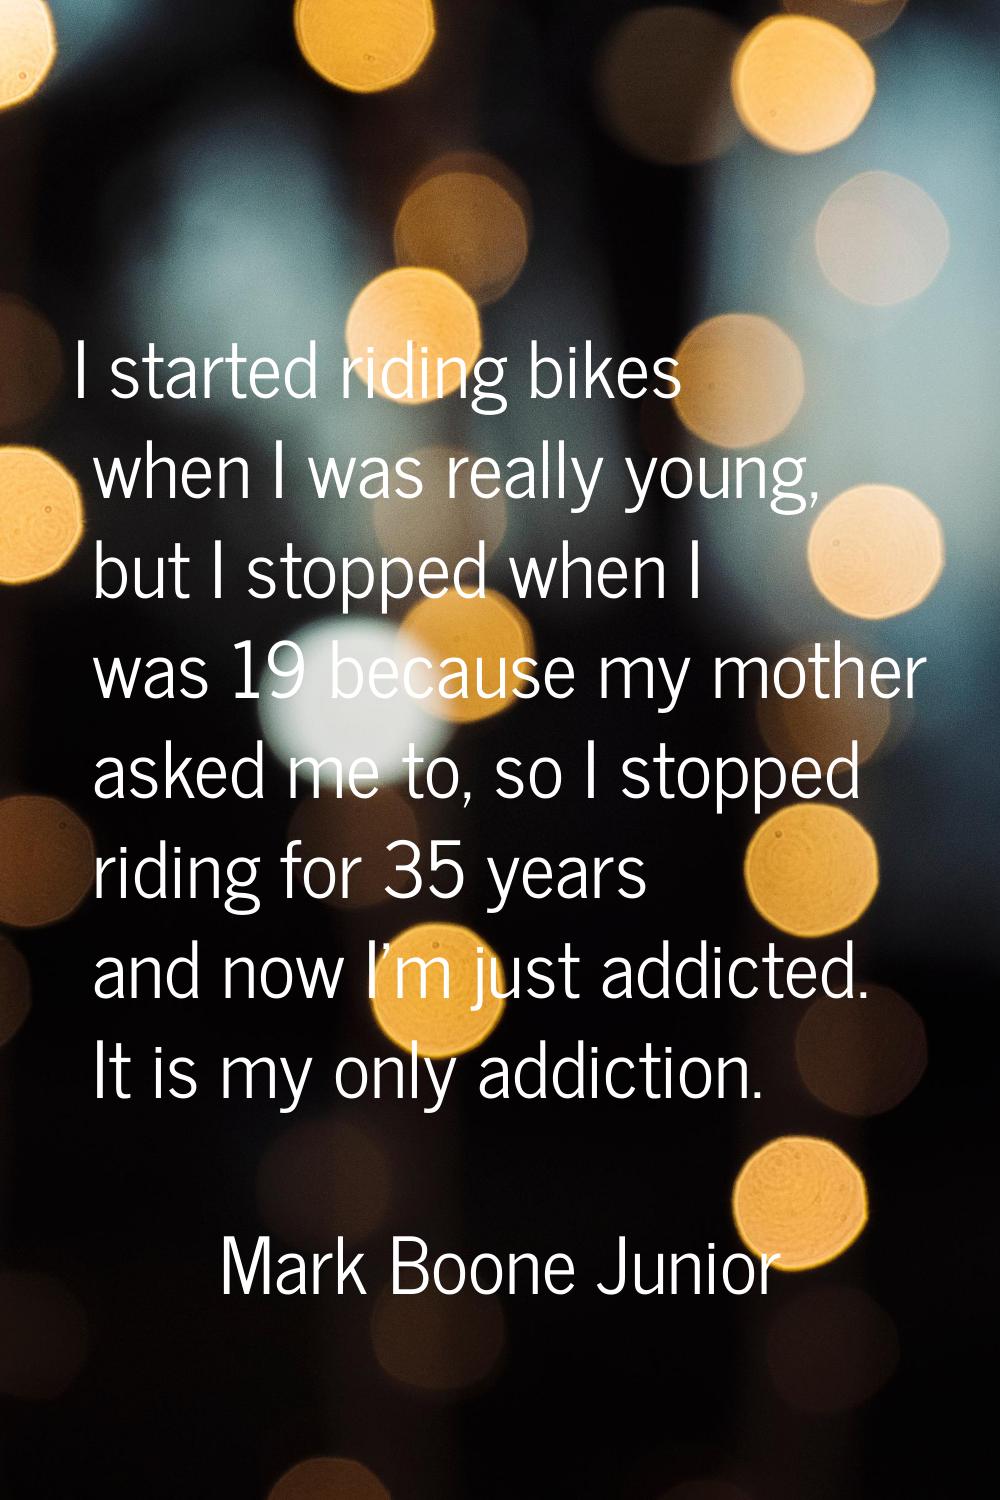 I started riding bikes when I was really young, but I stopped when I was 19 because my mother asked